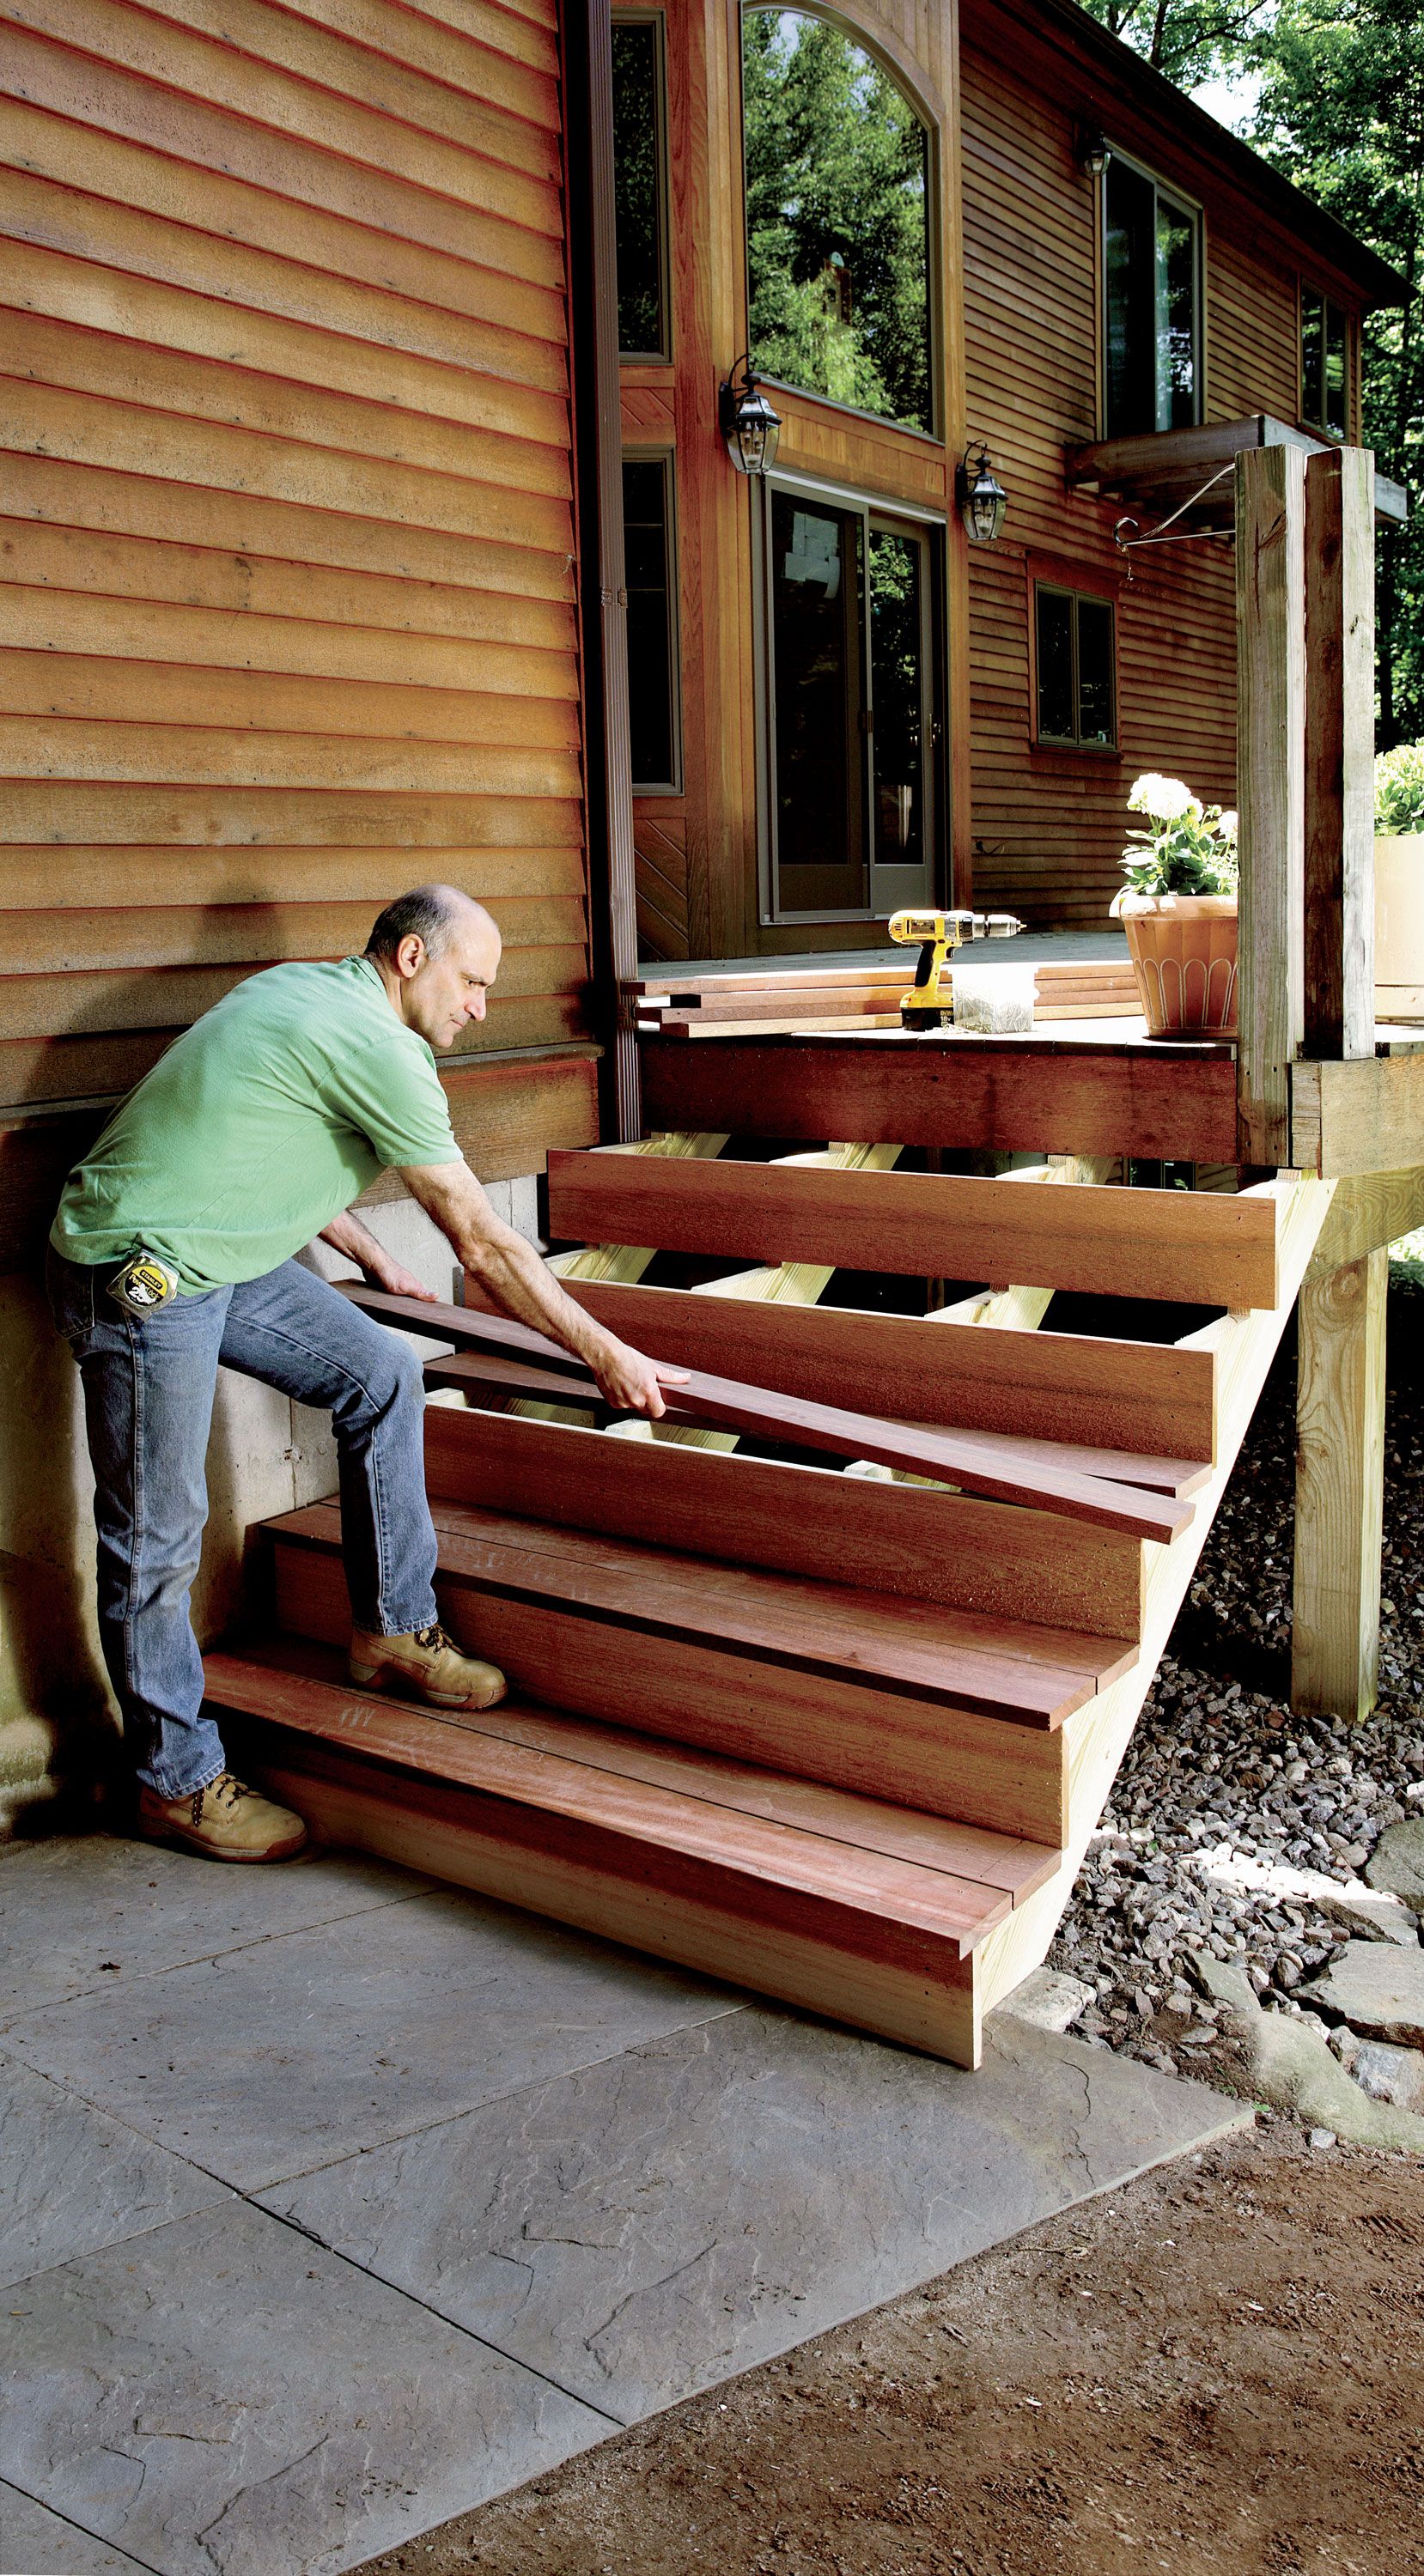 How To Build Stairs Design Plans, How To Install Outdoor Wood Steps